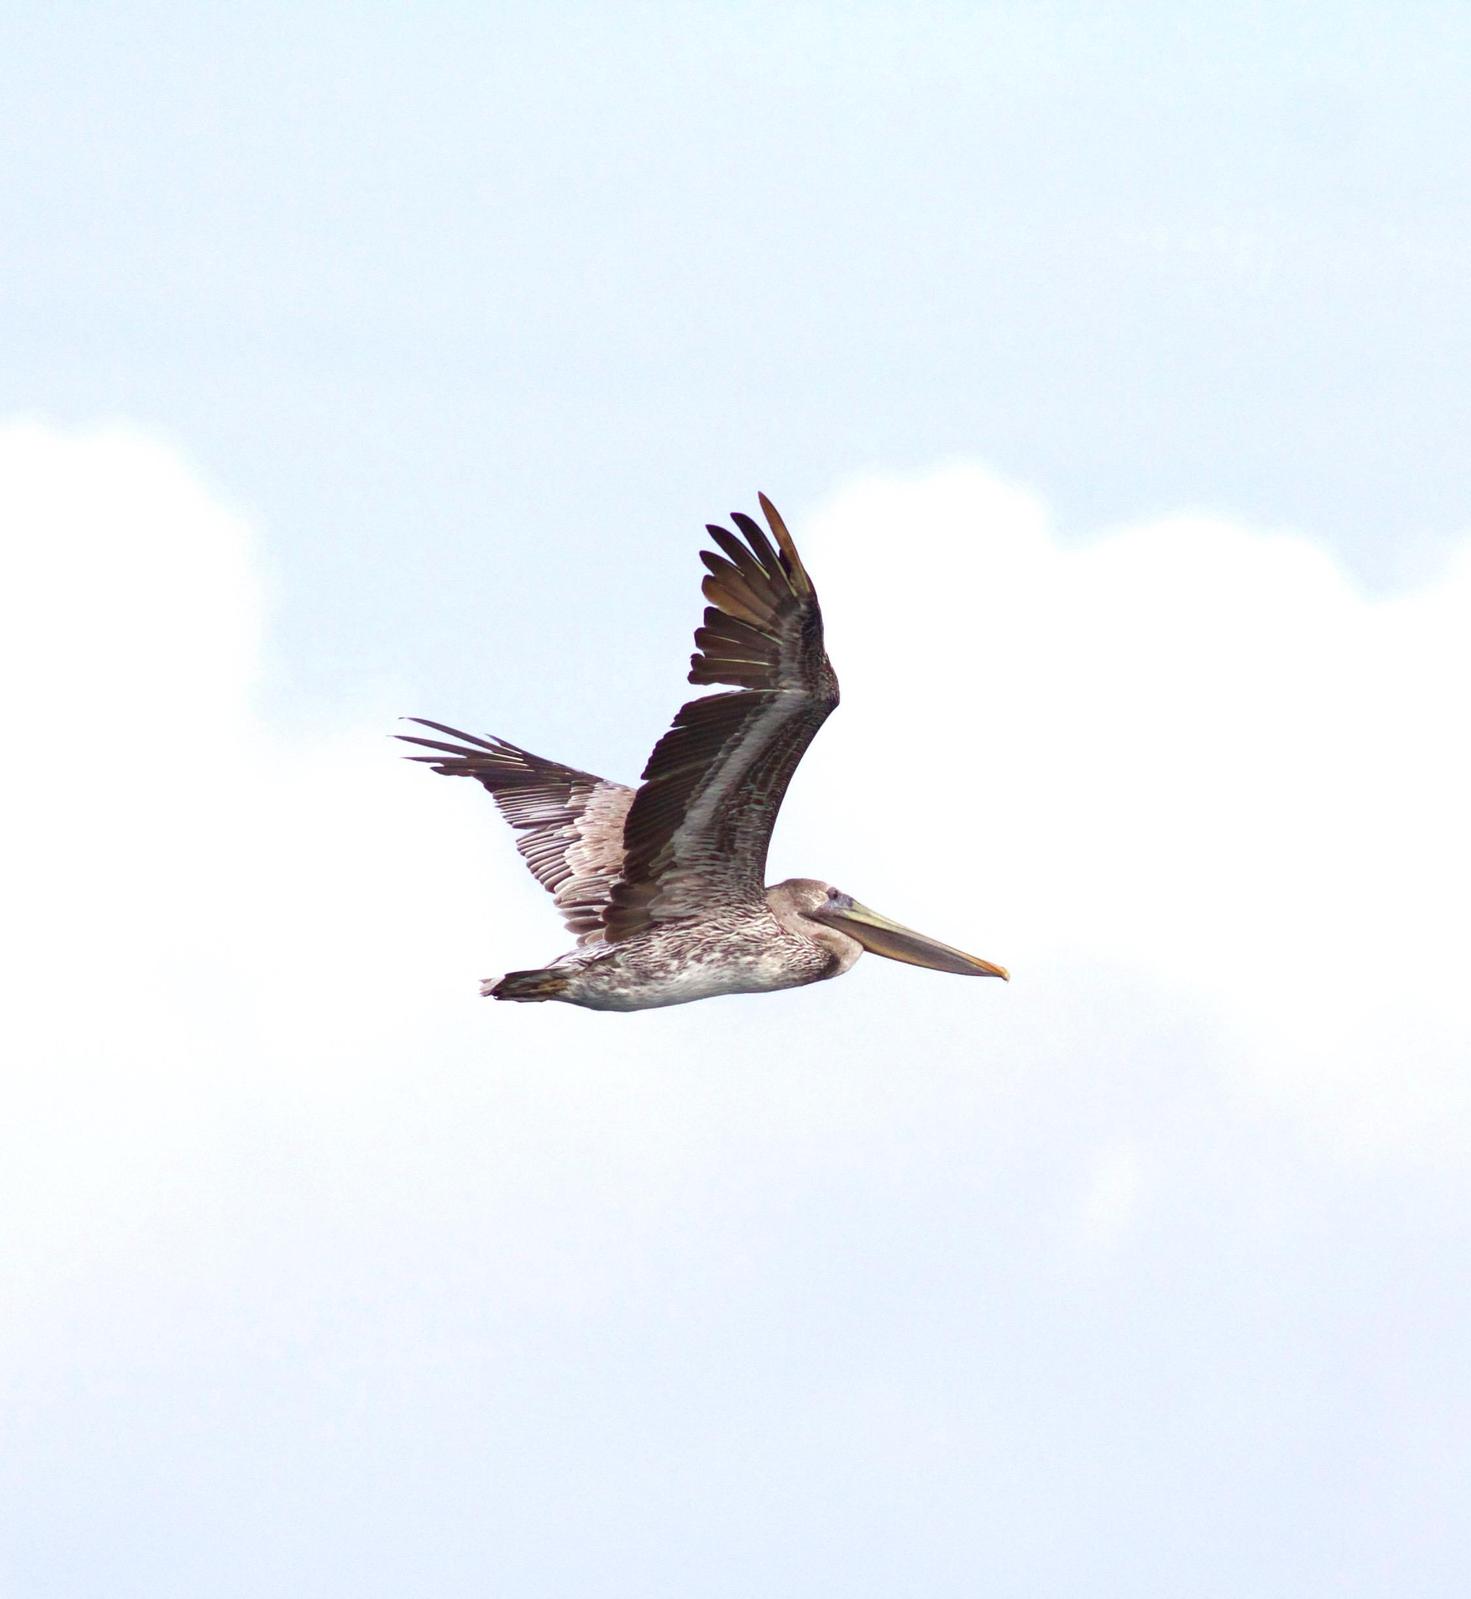 Brown Pelican Photo by Kathryn Keith